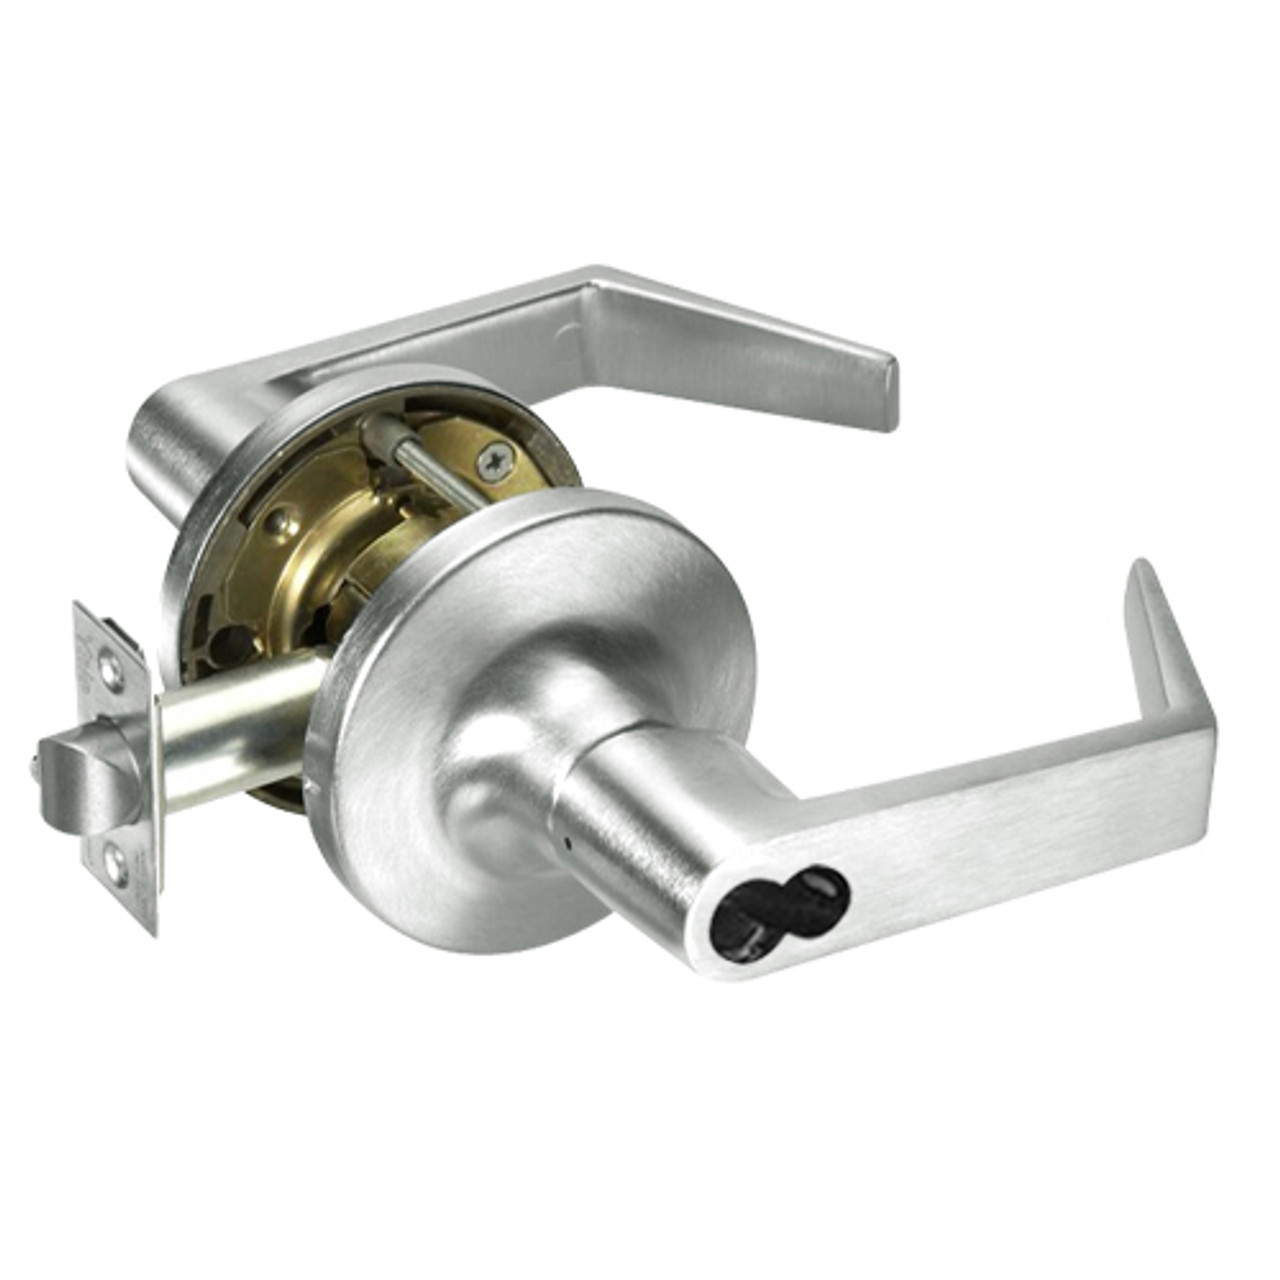 B-AU5407LN-619 Yale 5400LN Series Single Cylinder Entry Cylindrical Locks with Augusta Lever Prepped for SFIC in Satin Nickel